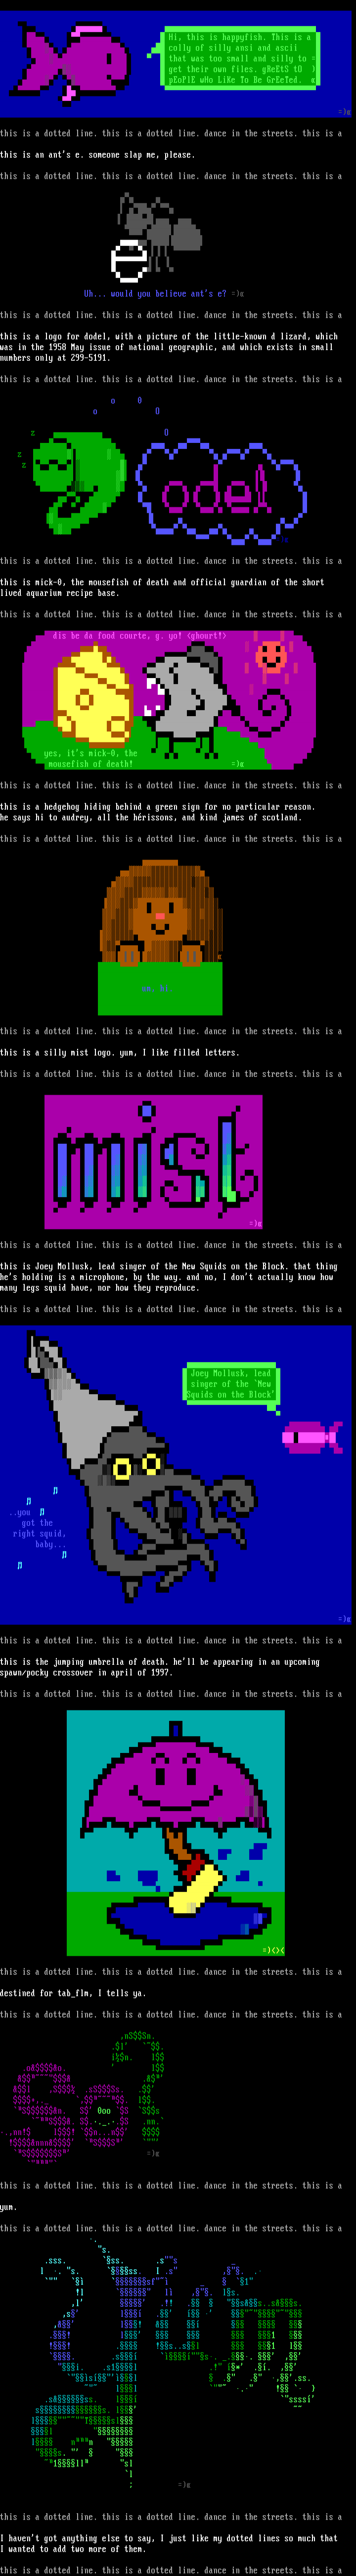 ansi/ascii colly of DEATH! by hsifyppah